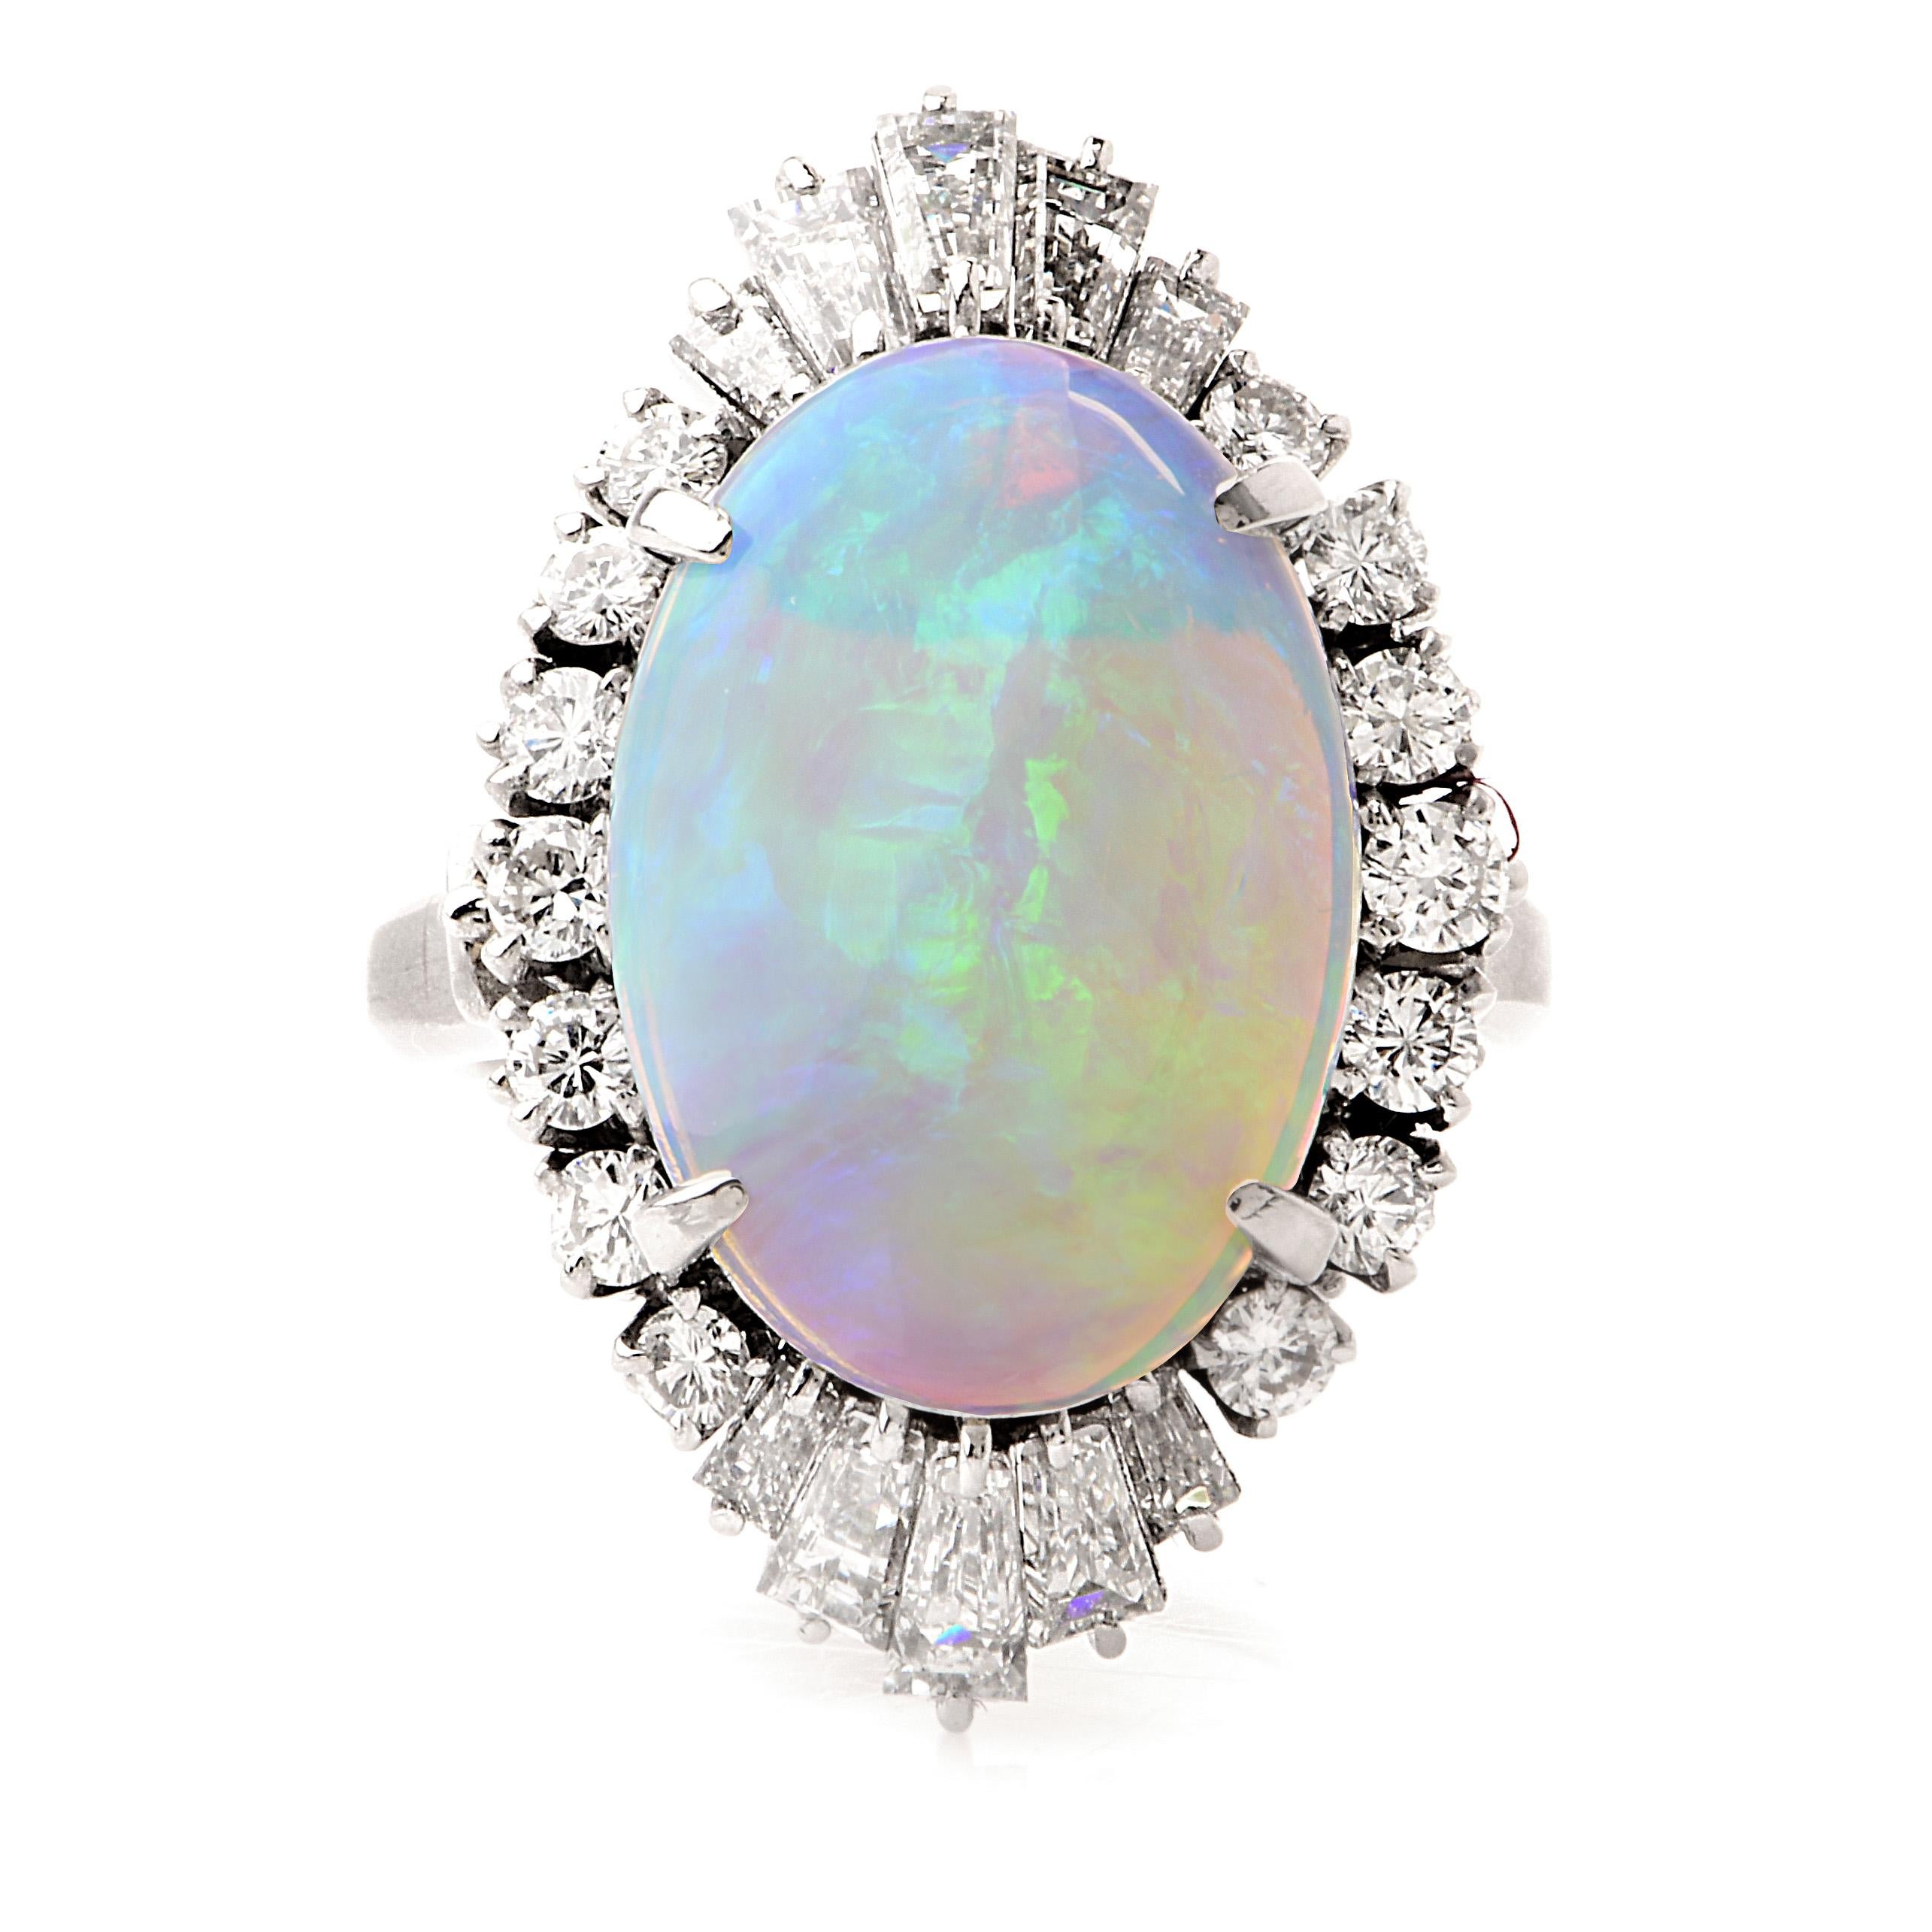 This stunning diamond and opal cocktail ring is crafted in solid platinum, weighing 10.3  grams and measures 24mm x 13mm high. Showcasing a prominent four-prong set cosmic GIA certified  natural opal, weighing approximately, 5.40 carats. Surrounded